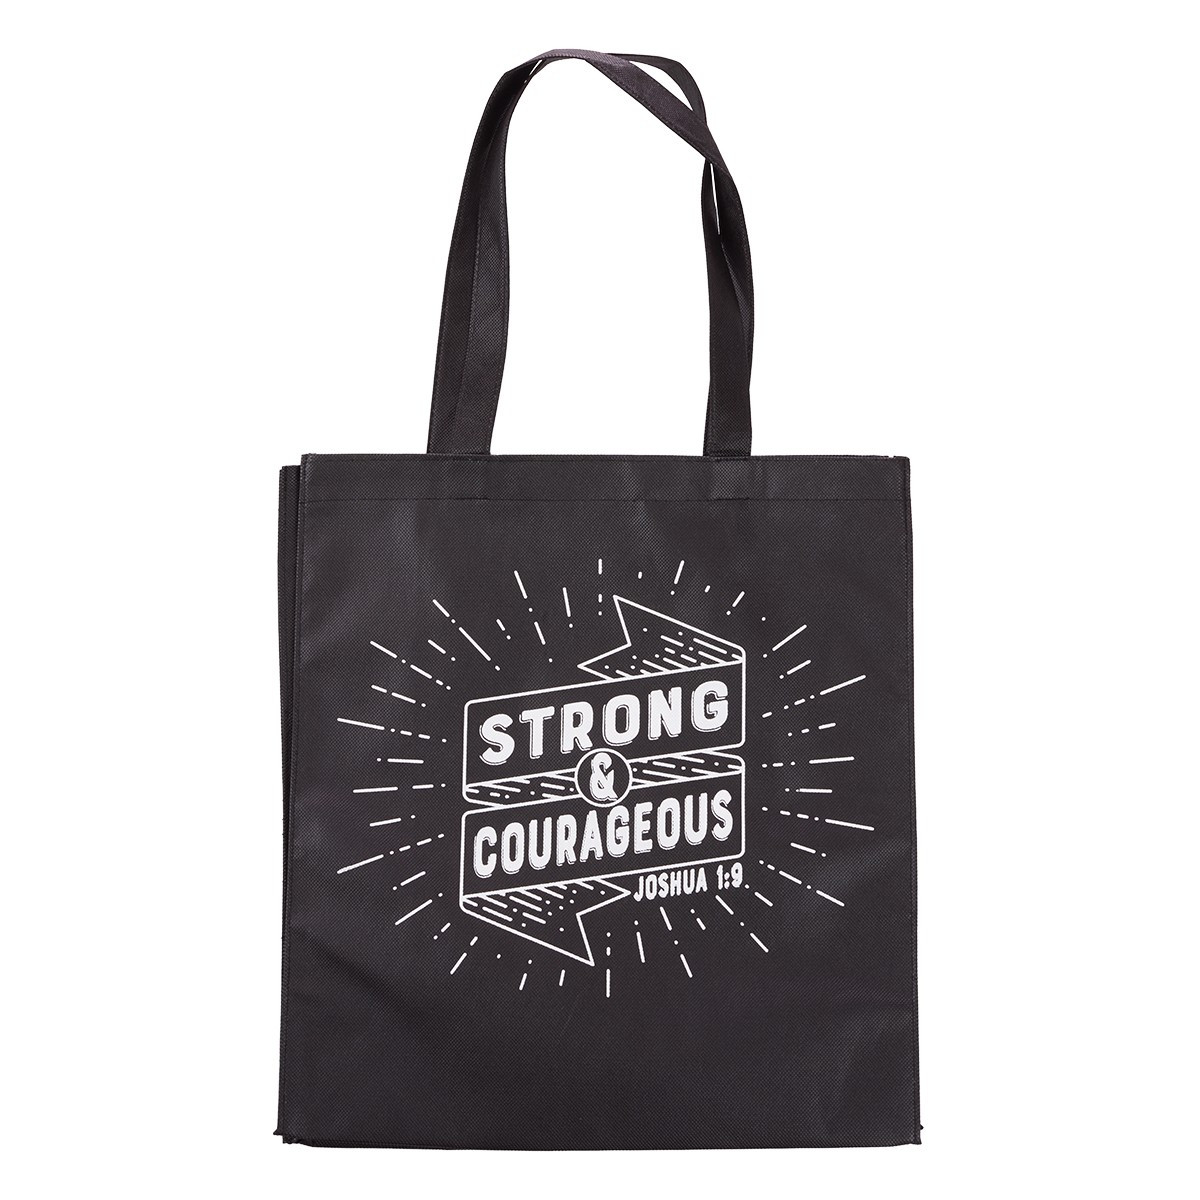 Strong & Courageous Tote